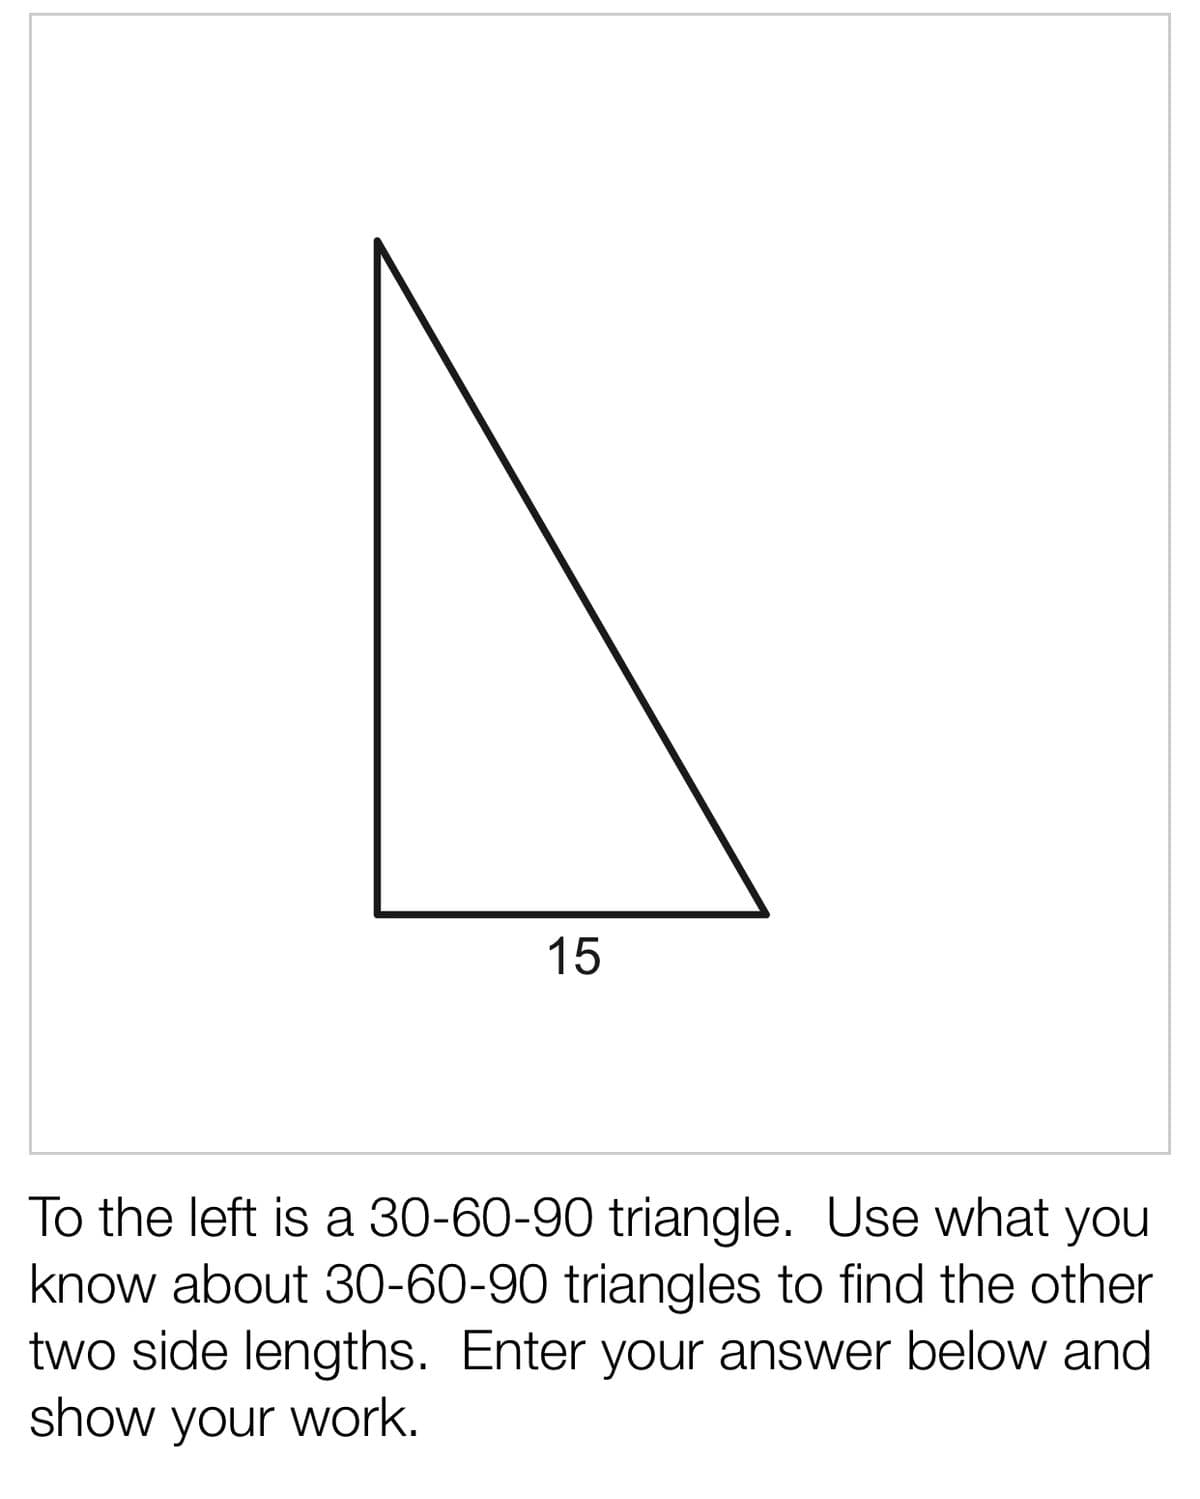 15
To the left is a 30-60-90 triangle. Use what you
know about 30-60-90 triangles to find the other
two side lengths. Enter your answer below and
show your work.
